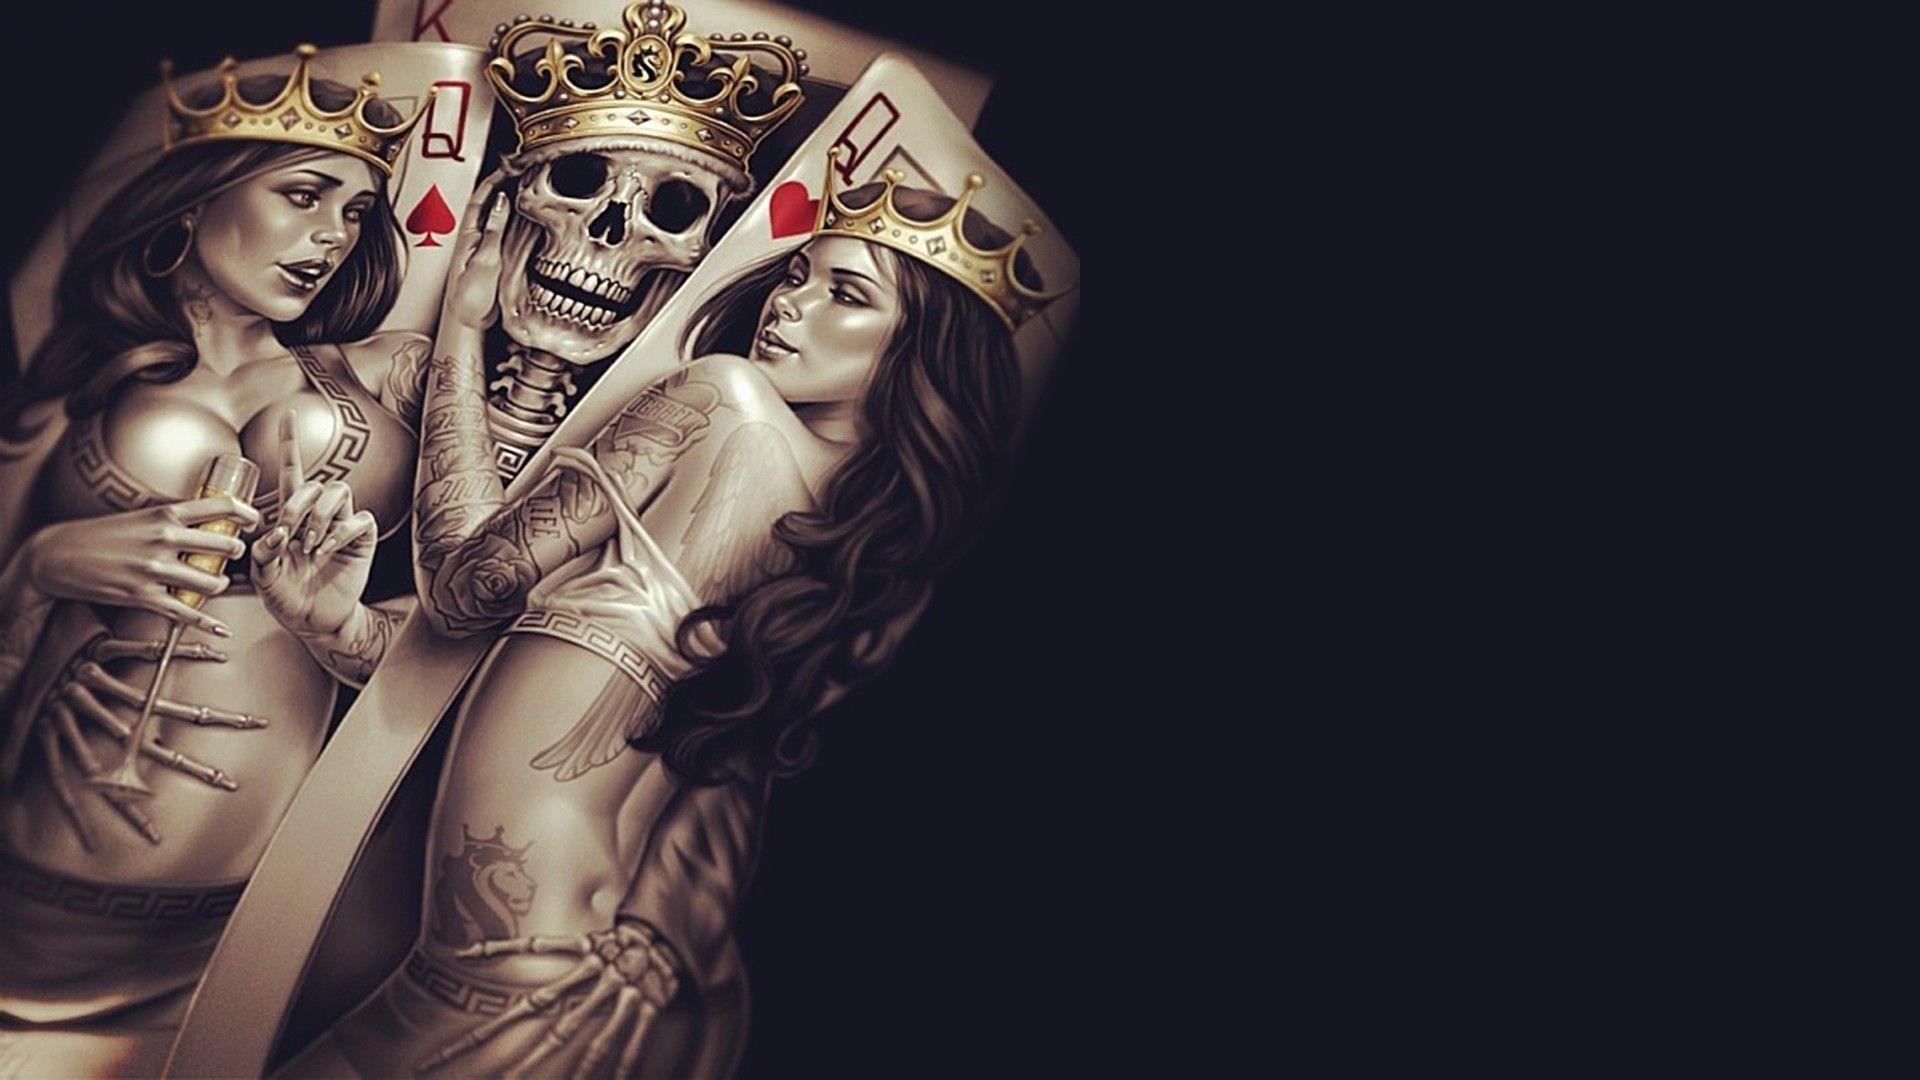 cool queen of hearts playing card, and the priest wallpaper